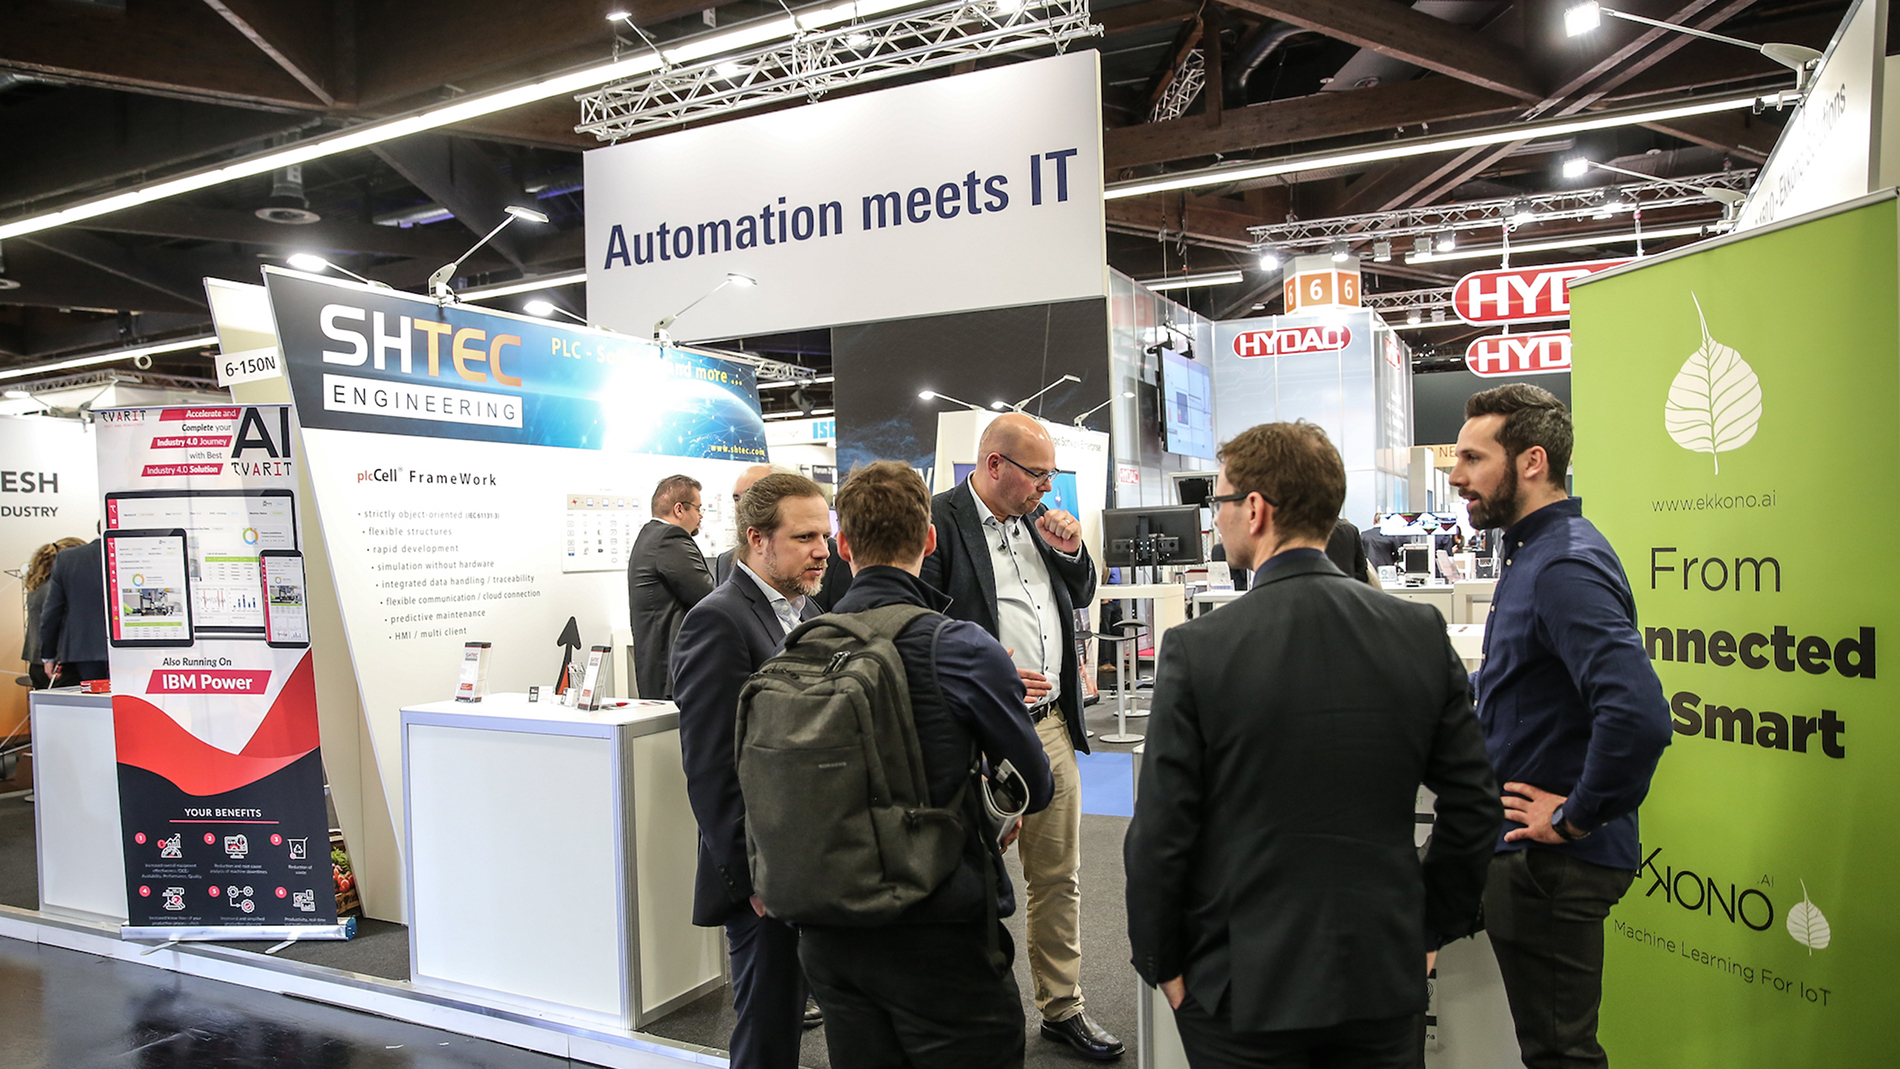 Joint stand  "Automation meets IT"